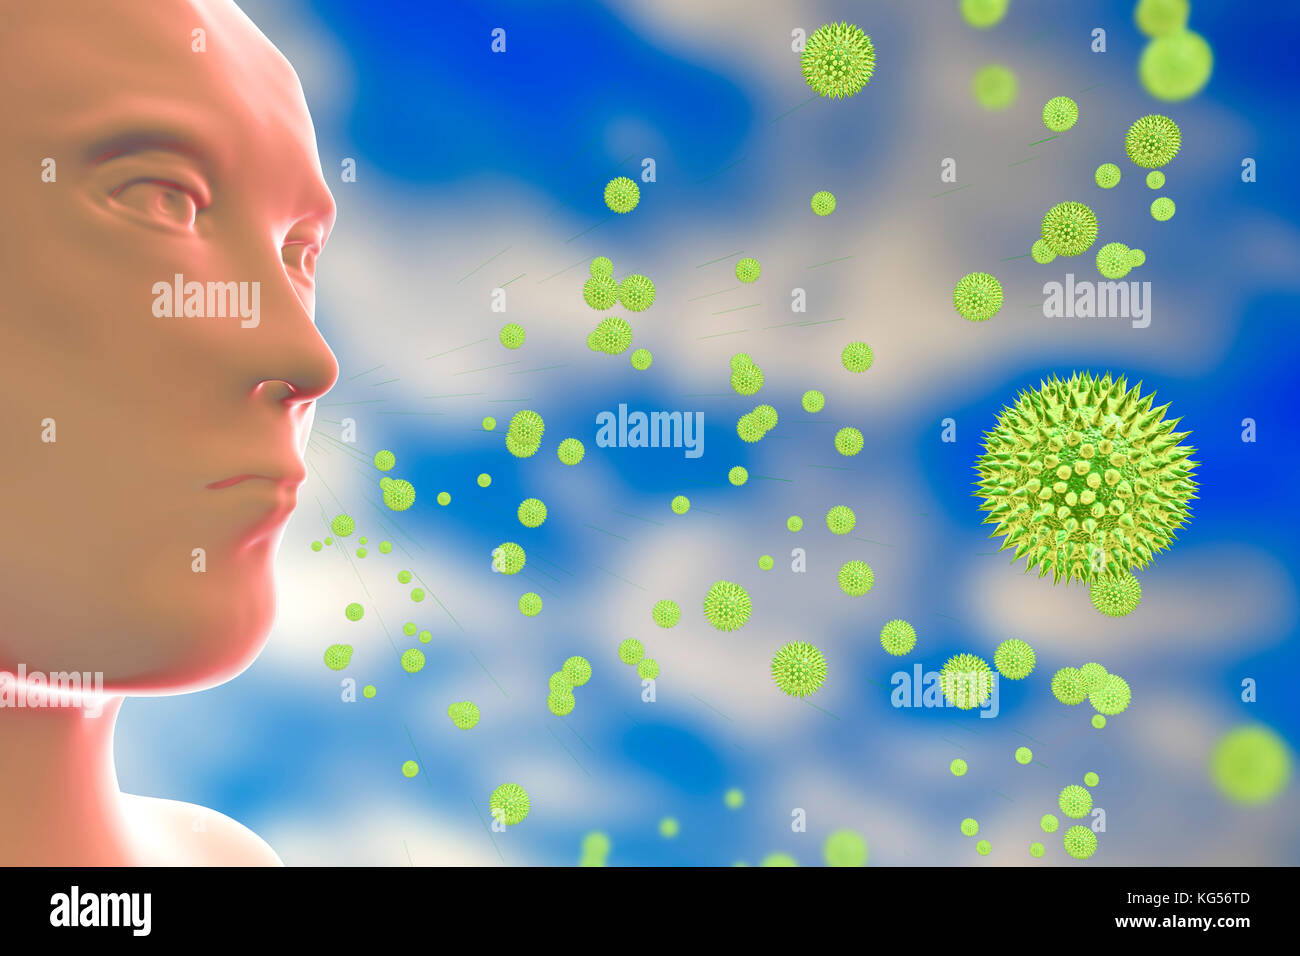 Hay fever. Computer illustration of a person inhaling pollen grains. Pollen grains are released when flowering plants reproduce. Some people become sensitised to pollen in the air, and have an allergic reaction (rhinitis, or pollinosis) whenever they are in contact with it. The symptoms of an attack include inflamed, streaming eyes and a running, blocked nose. The symptoms are caused by a massive release of the chemical histamine in the body in response to the pollen. Drugs which block the action of histamine are of some use in controlling the symptoms. Stock Photo